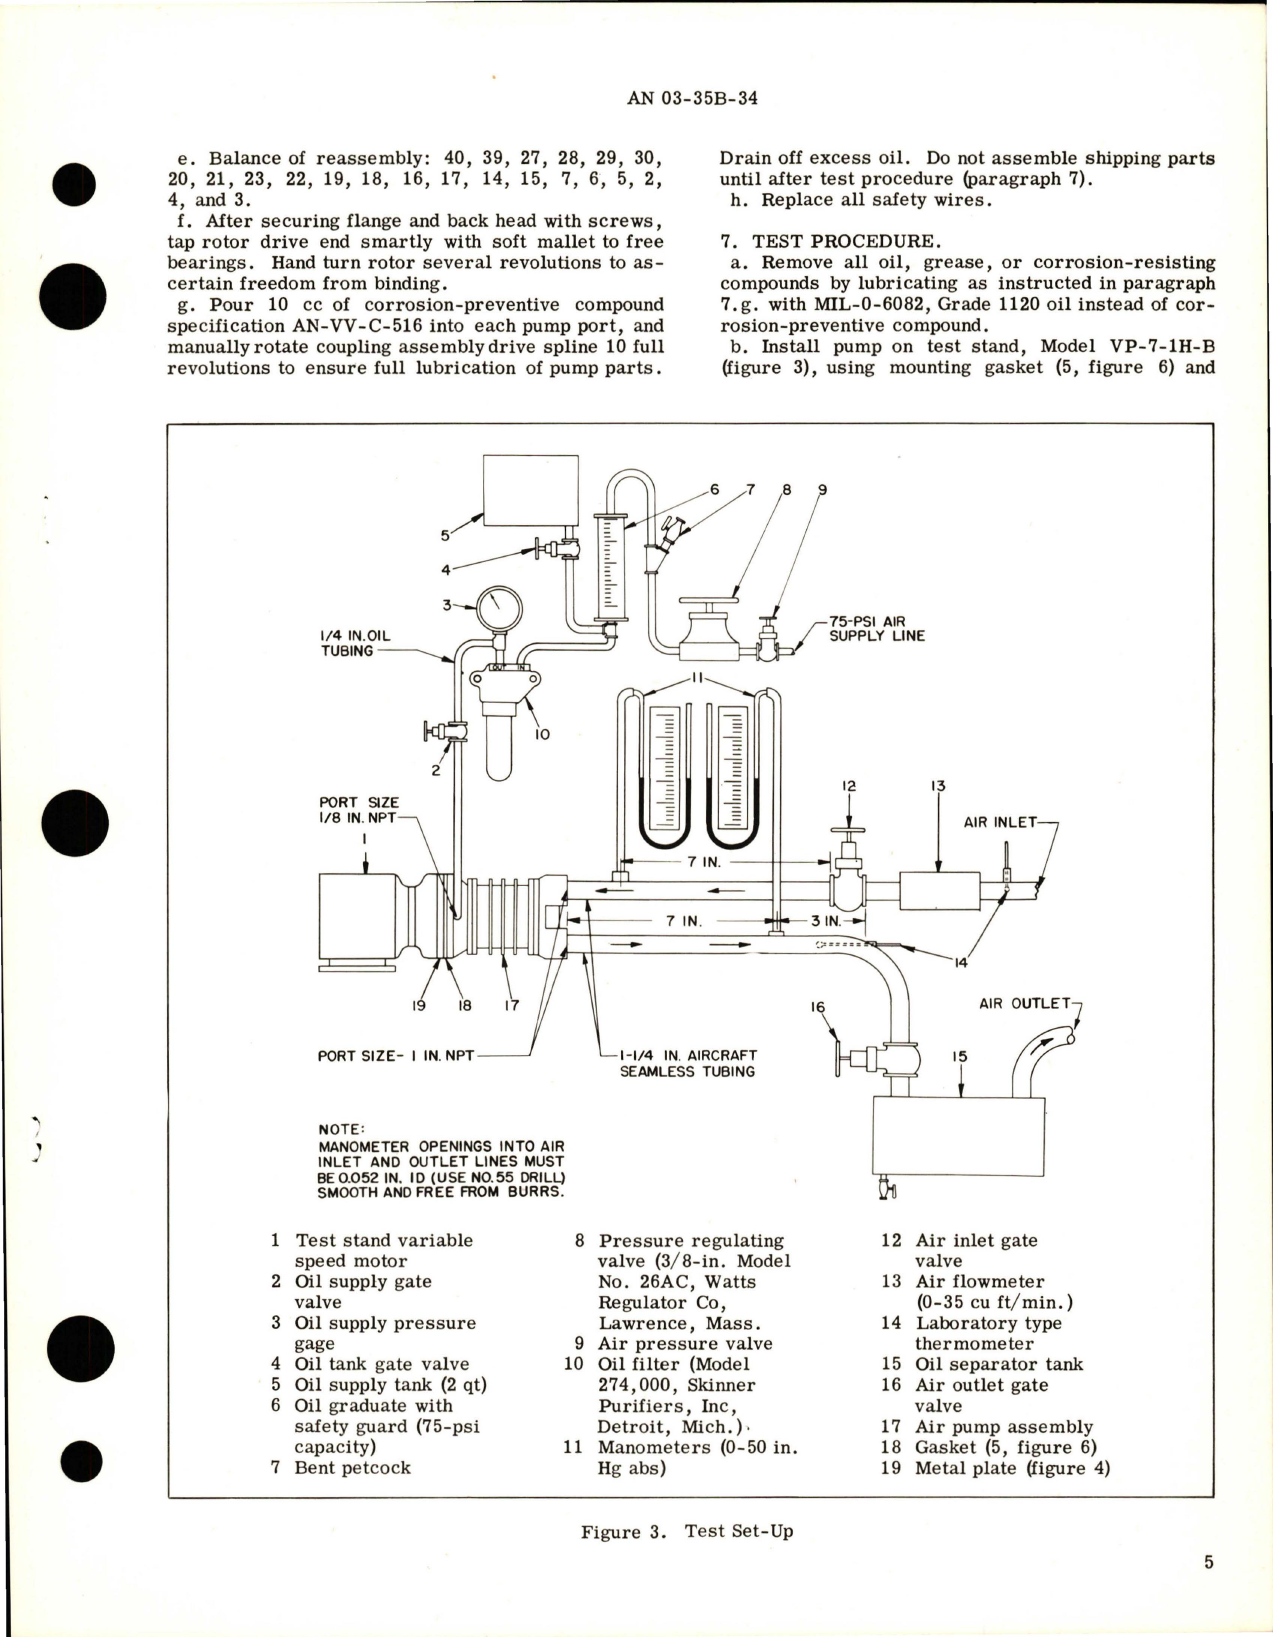 Sample page 5 from AirCorps Library document: Overhaul Instructions with Parts Breakdown for Air Pump Assembly - Parts 33E02-1-A and 33E02-2-A 